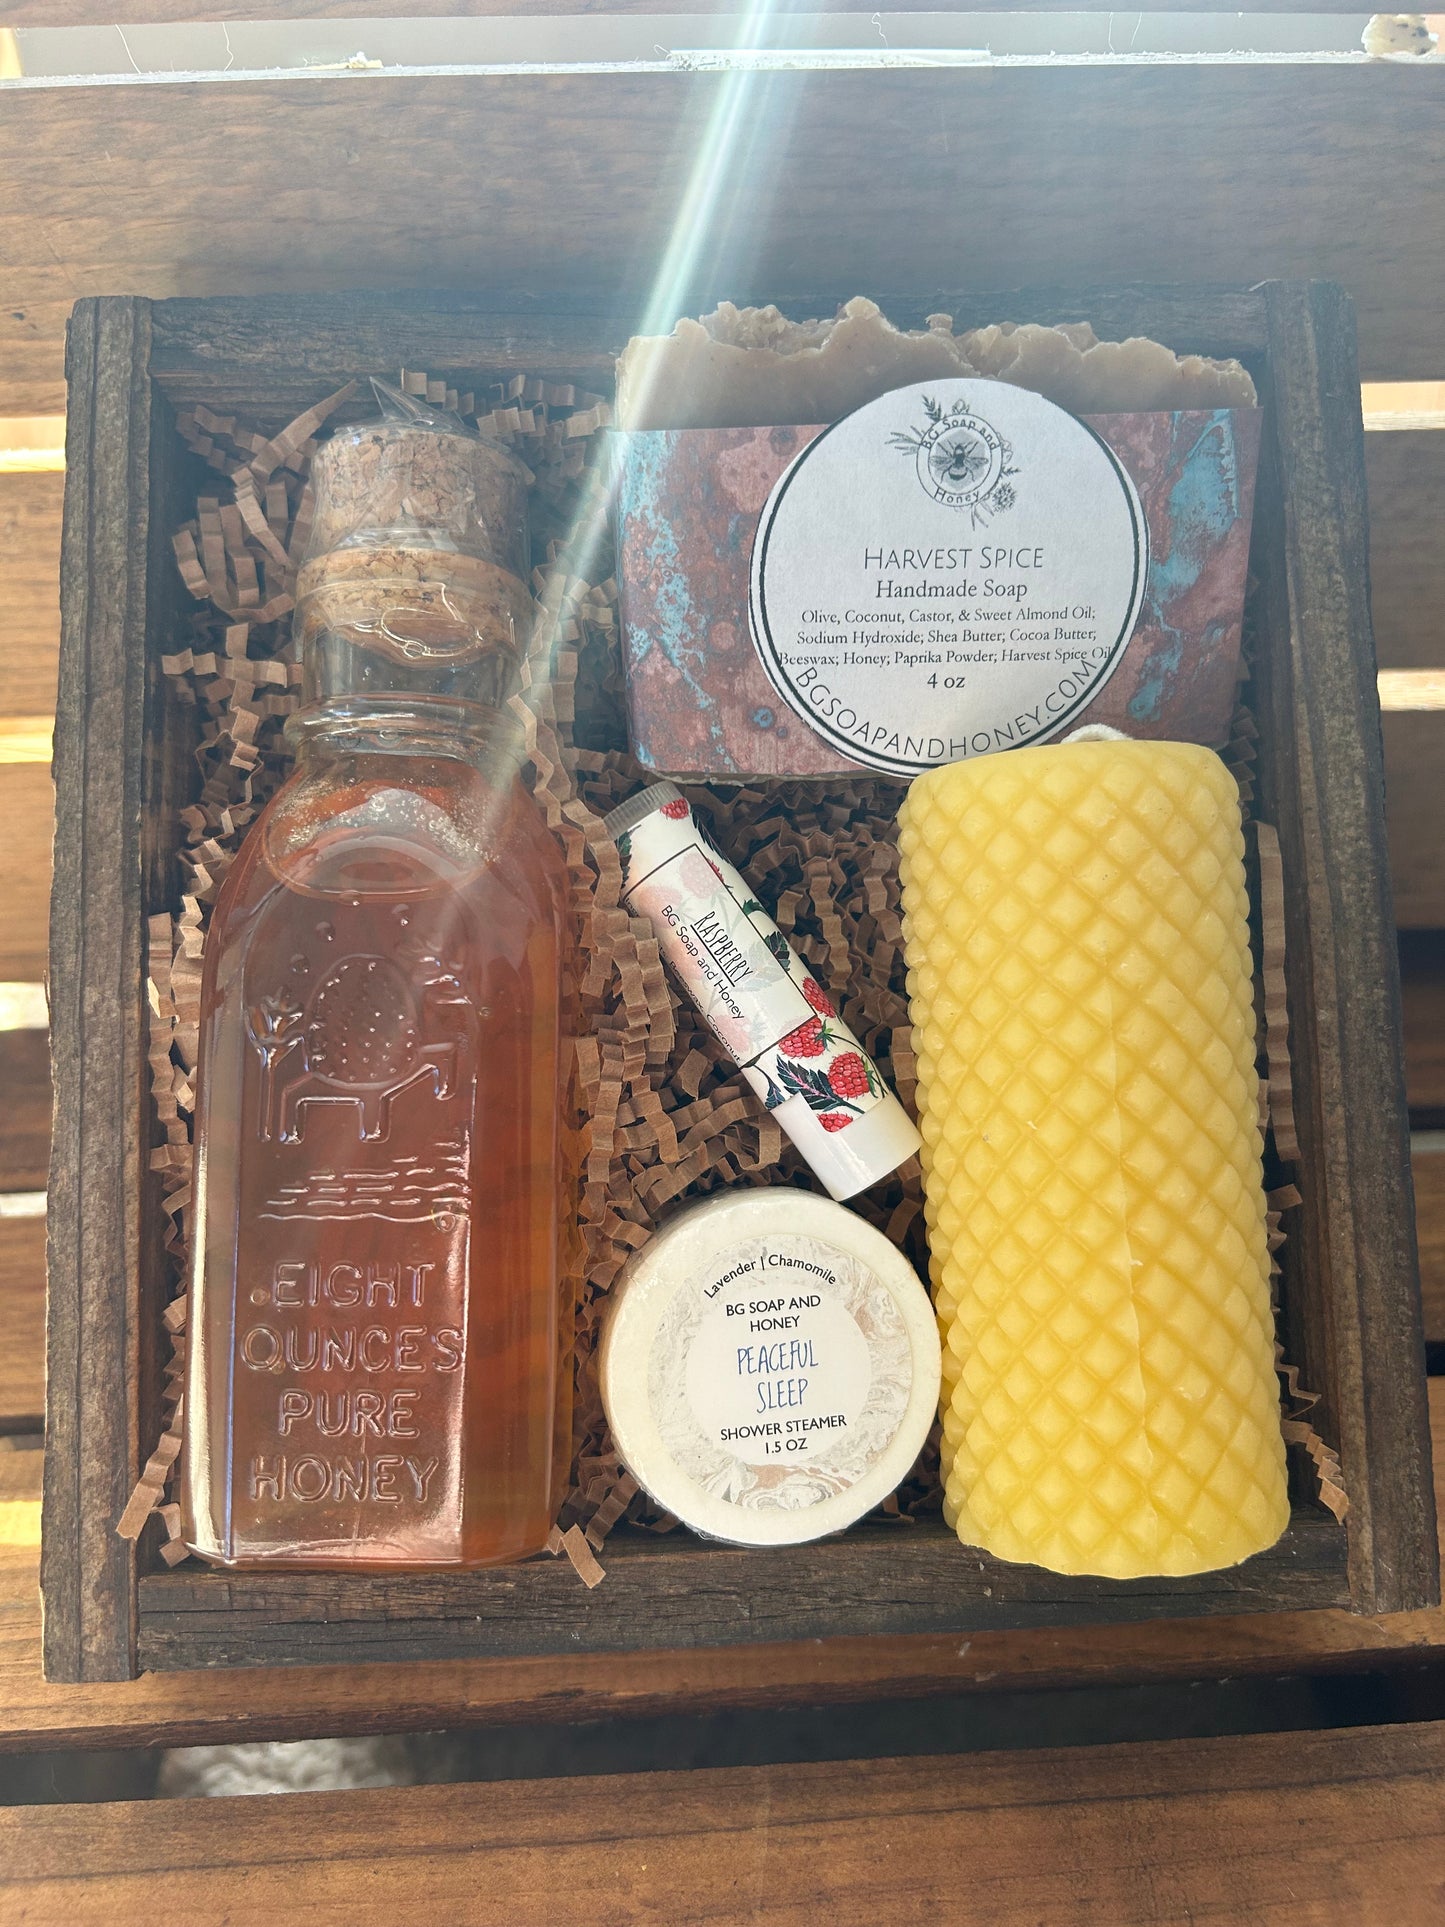 Gift Set in Wooden Gift Box | Harvest Spice Soap | 8oz Honey Muth | 6oz Beeswax Pillar Candle | Beeswax Lip Balm | Shower Steamer